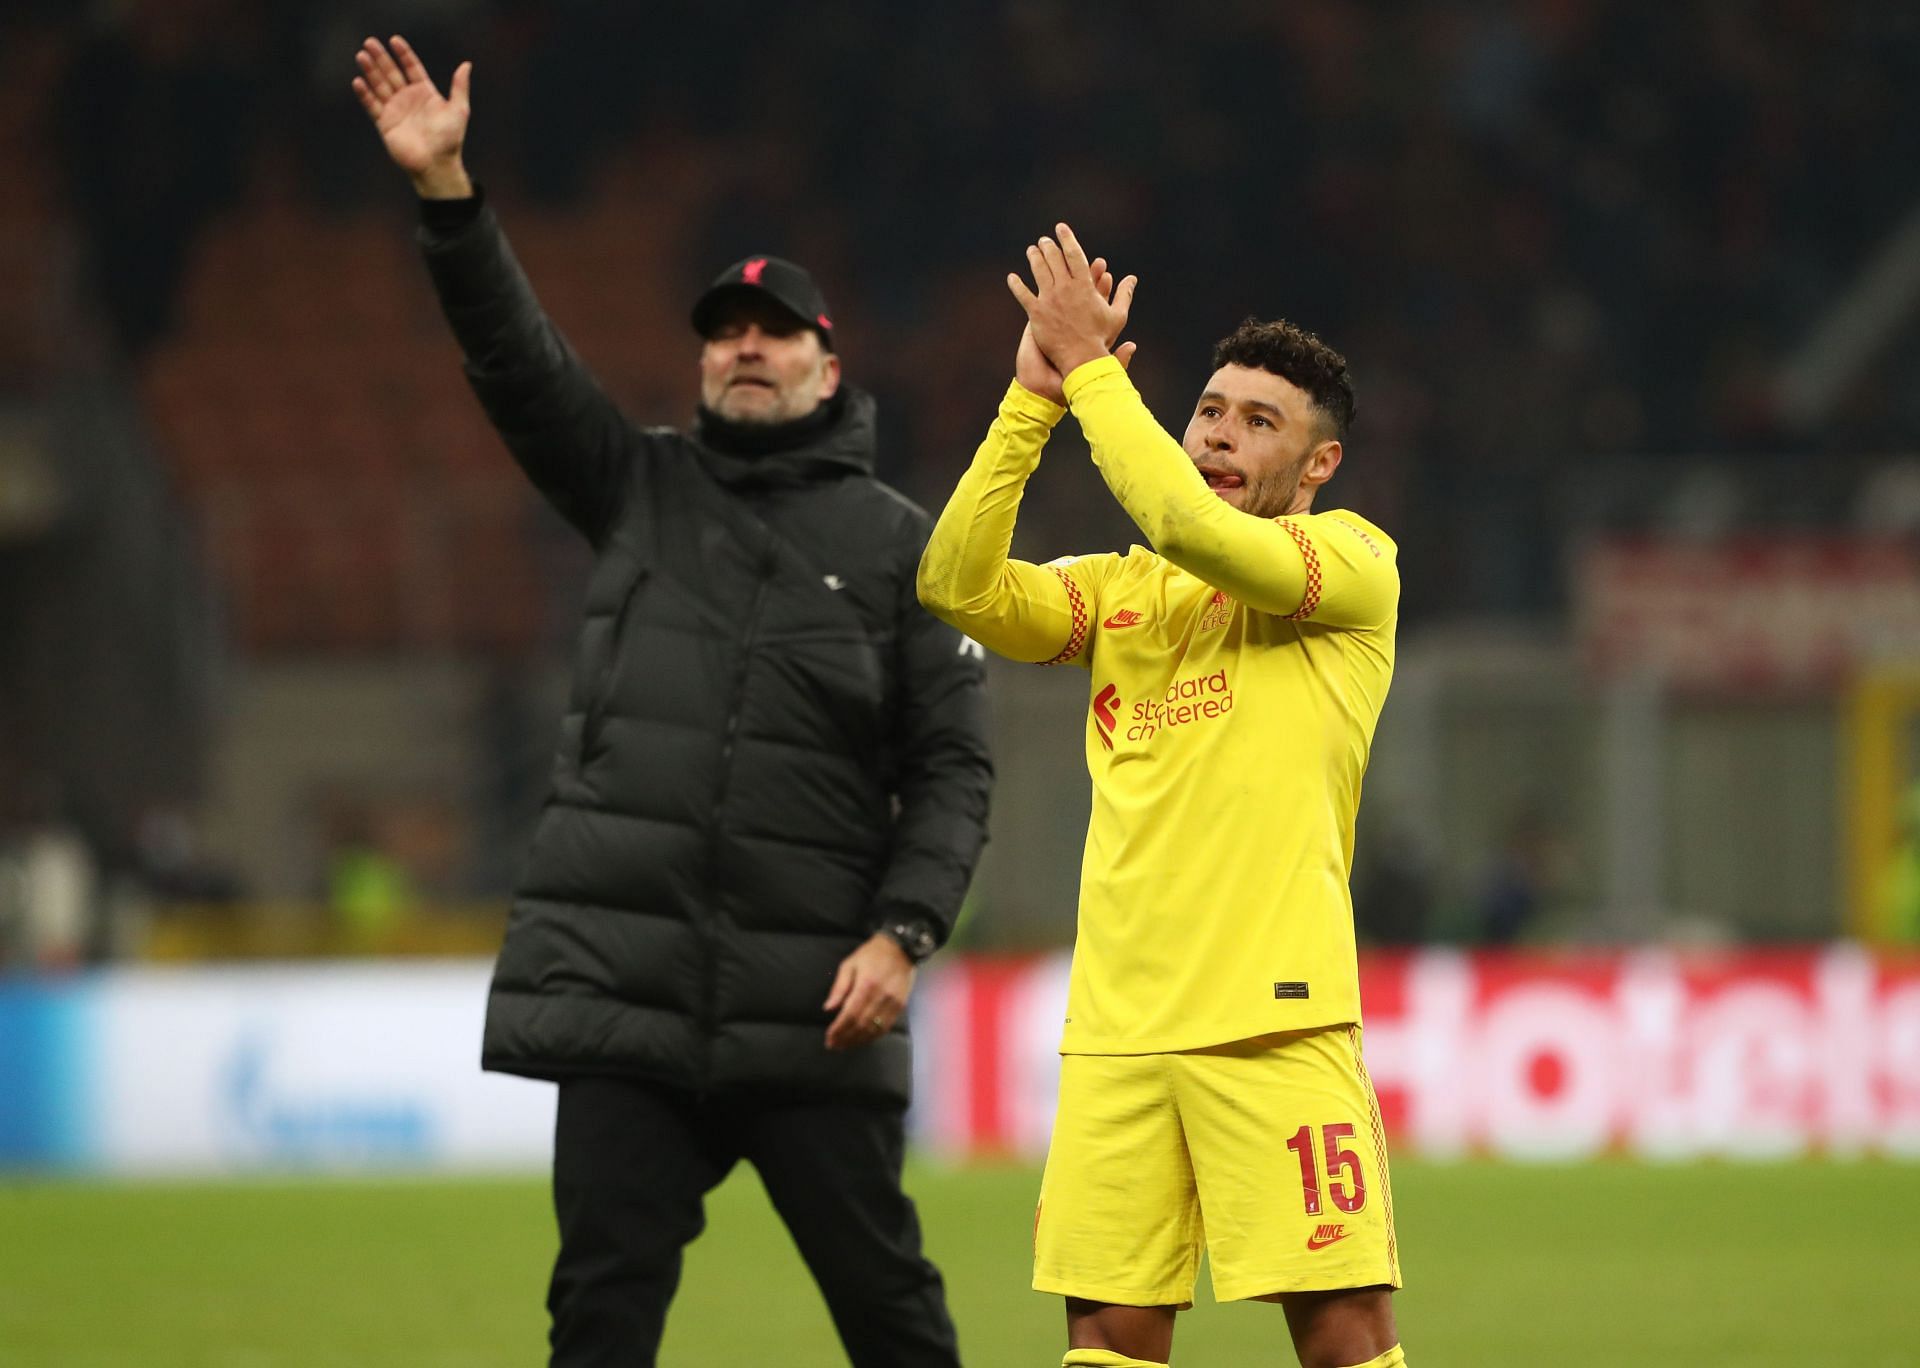 Chamberlain has one year left on his deal with Liverpool